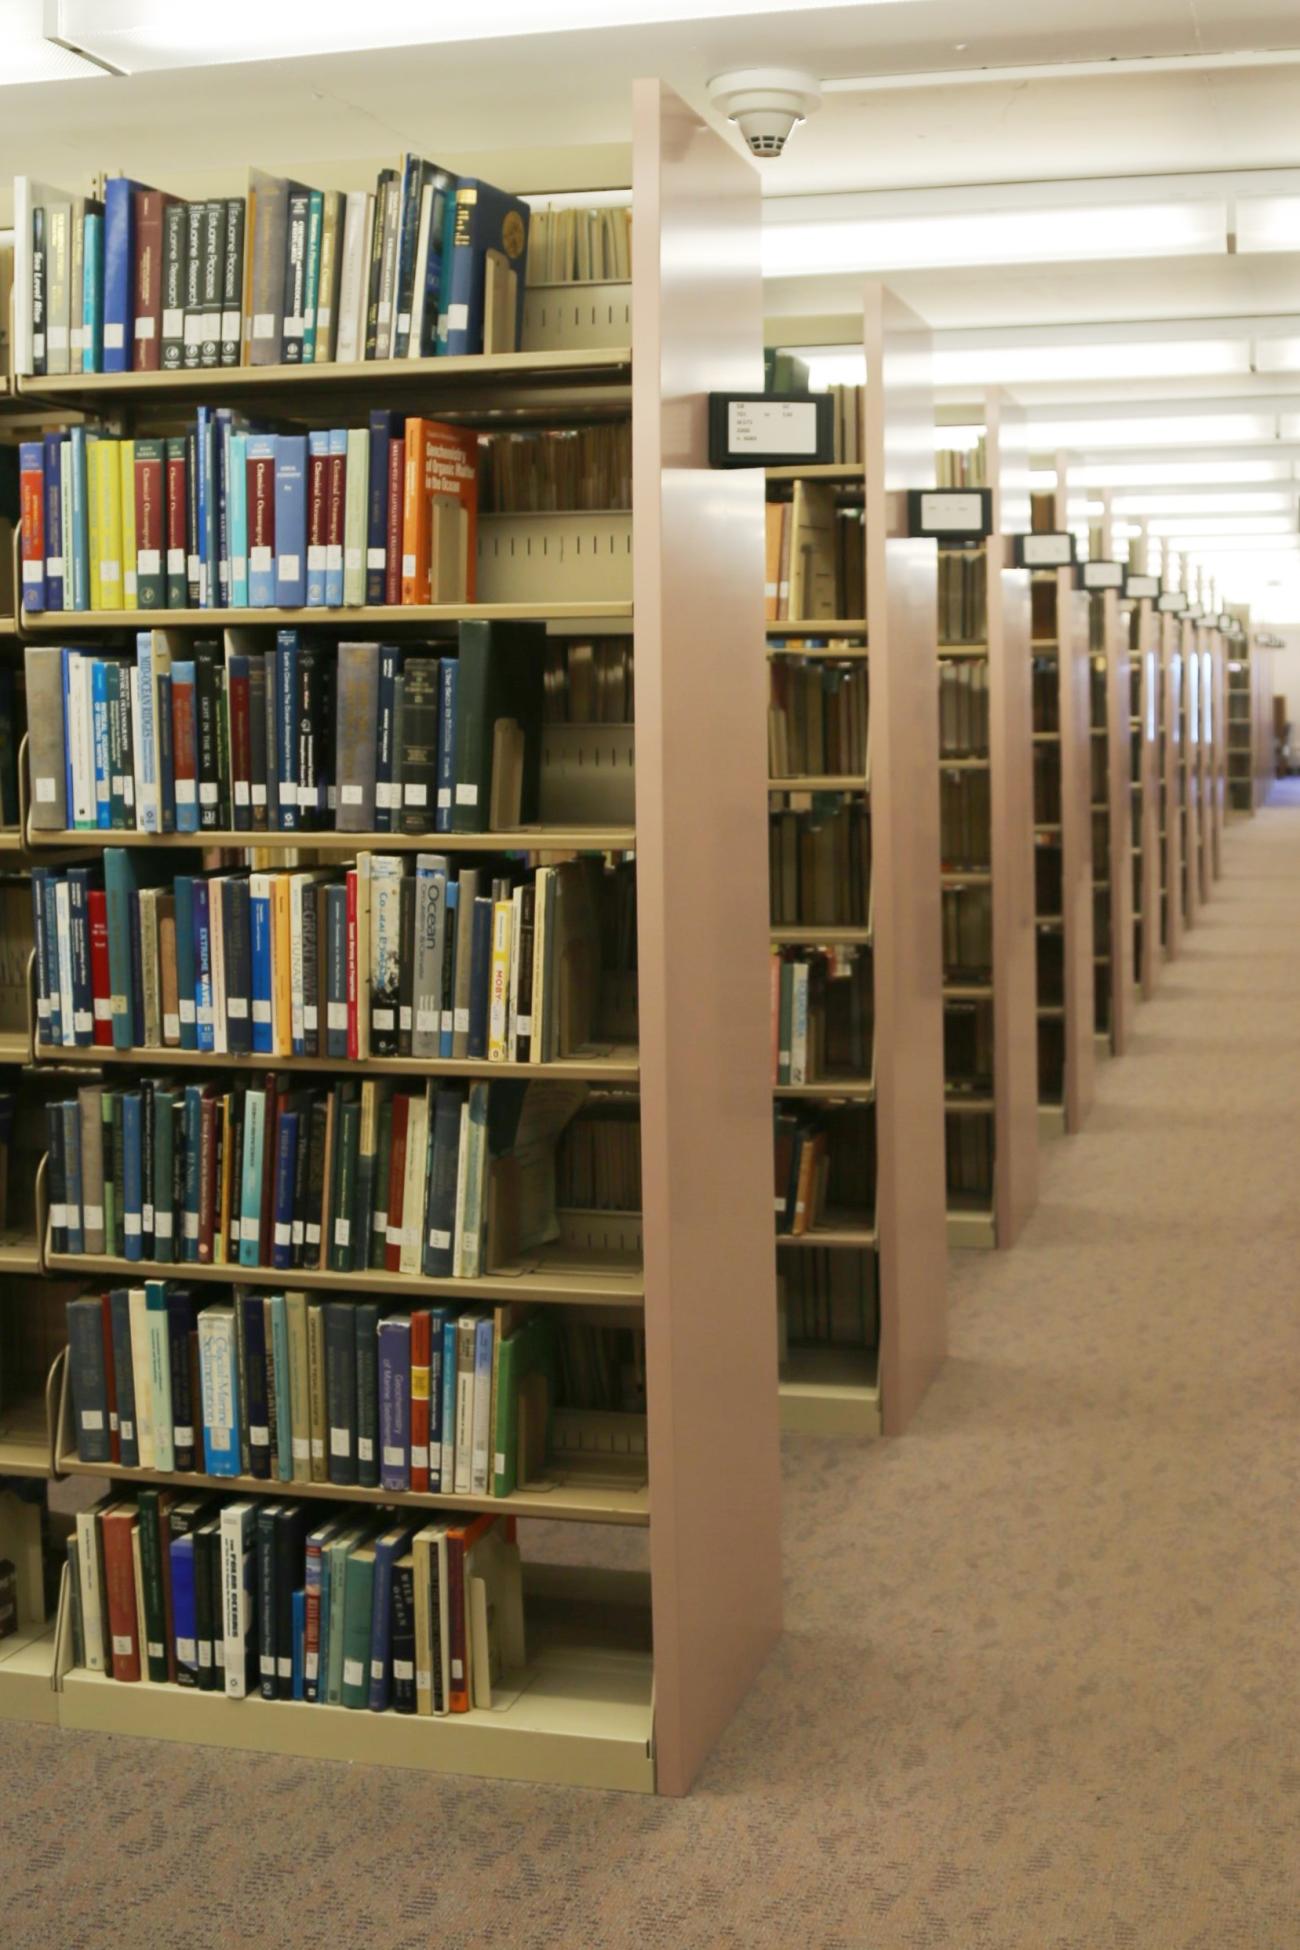 Countless rows of library stacks filled with books